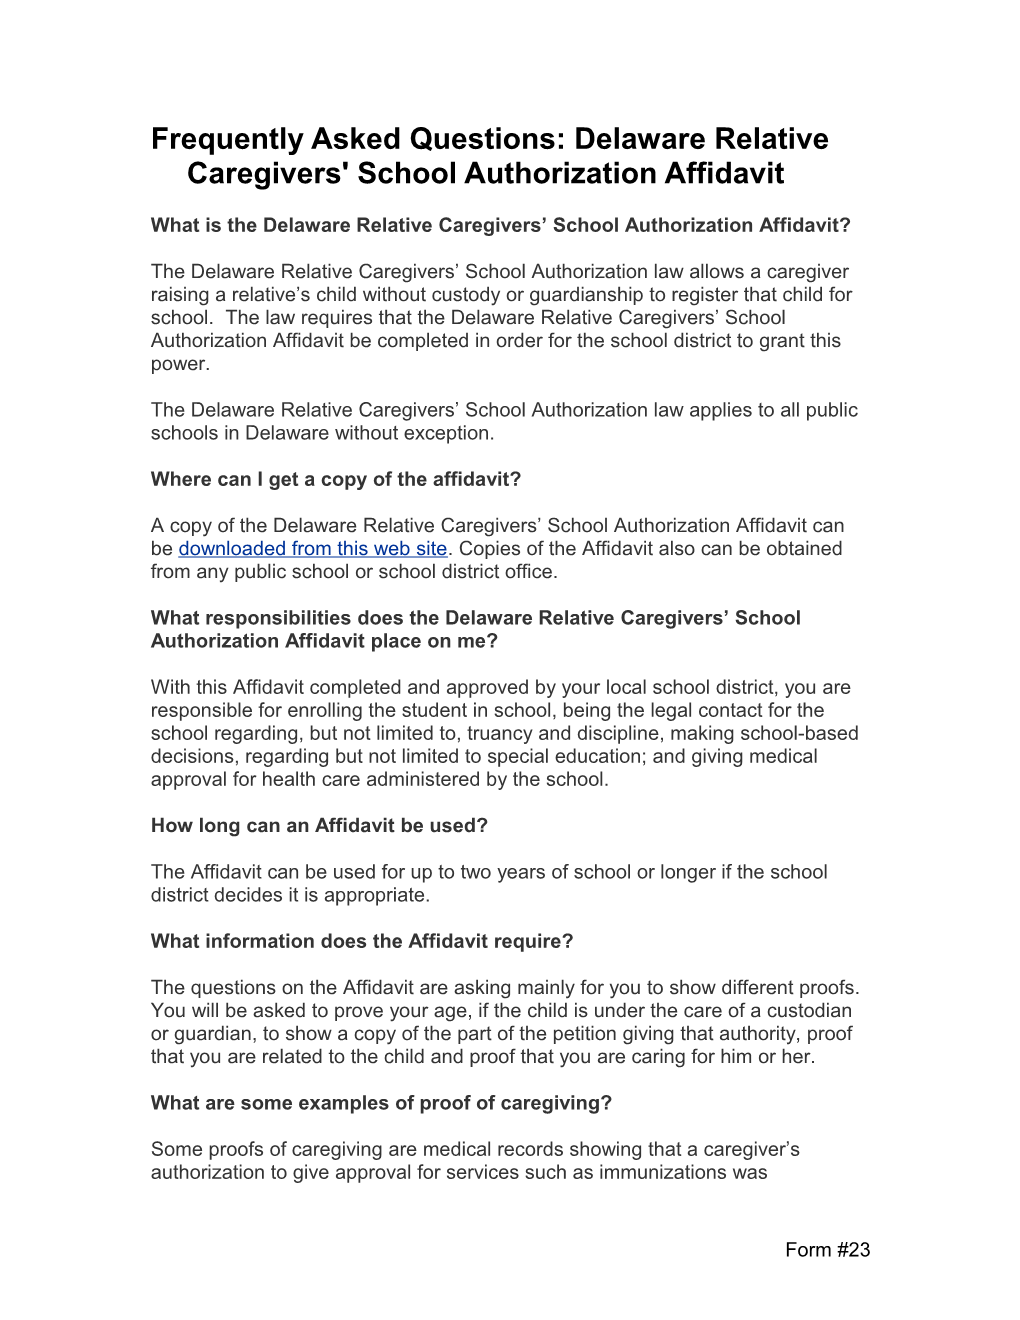 Frequently Asked Questions: Delaware Relative Caregivers' School Authorization Affidavit